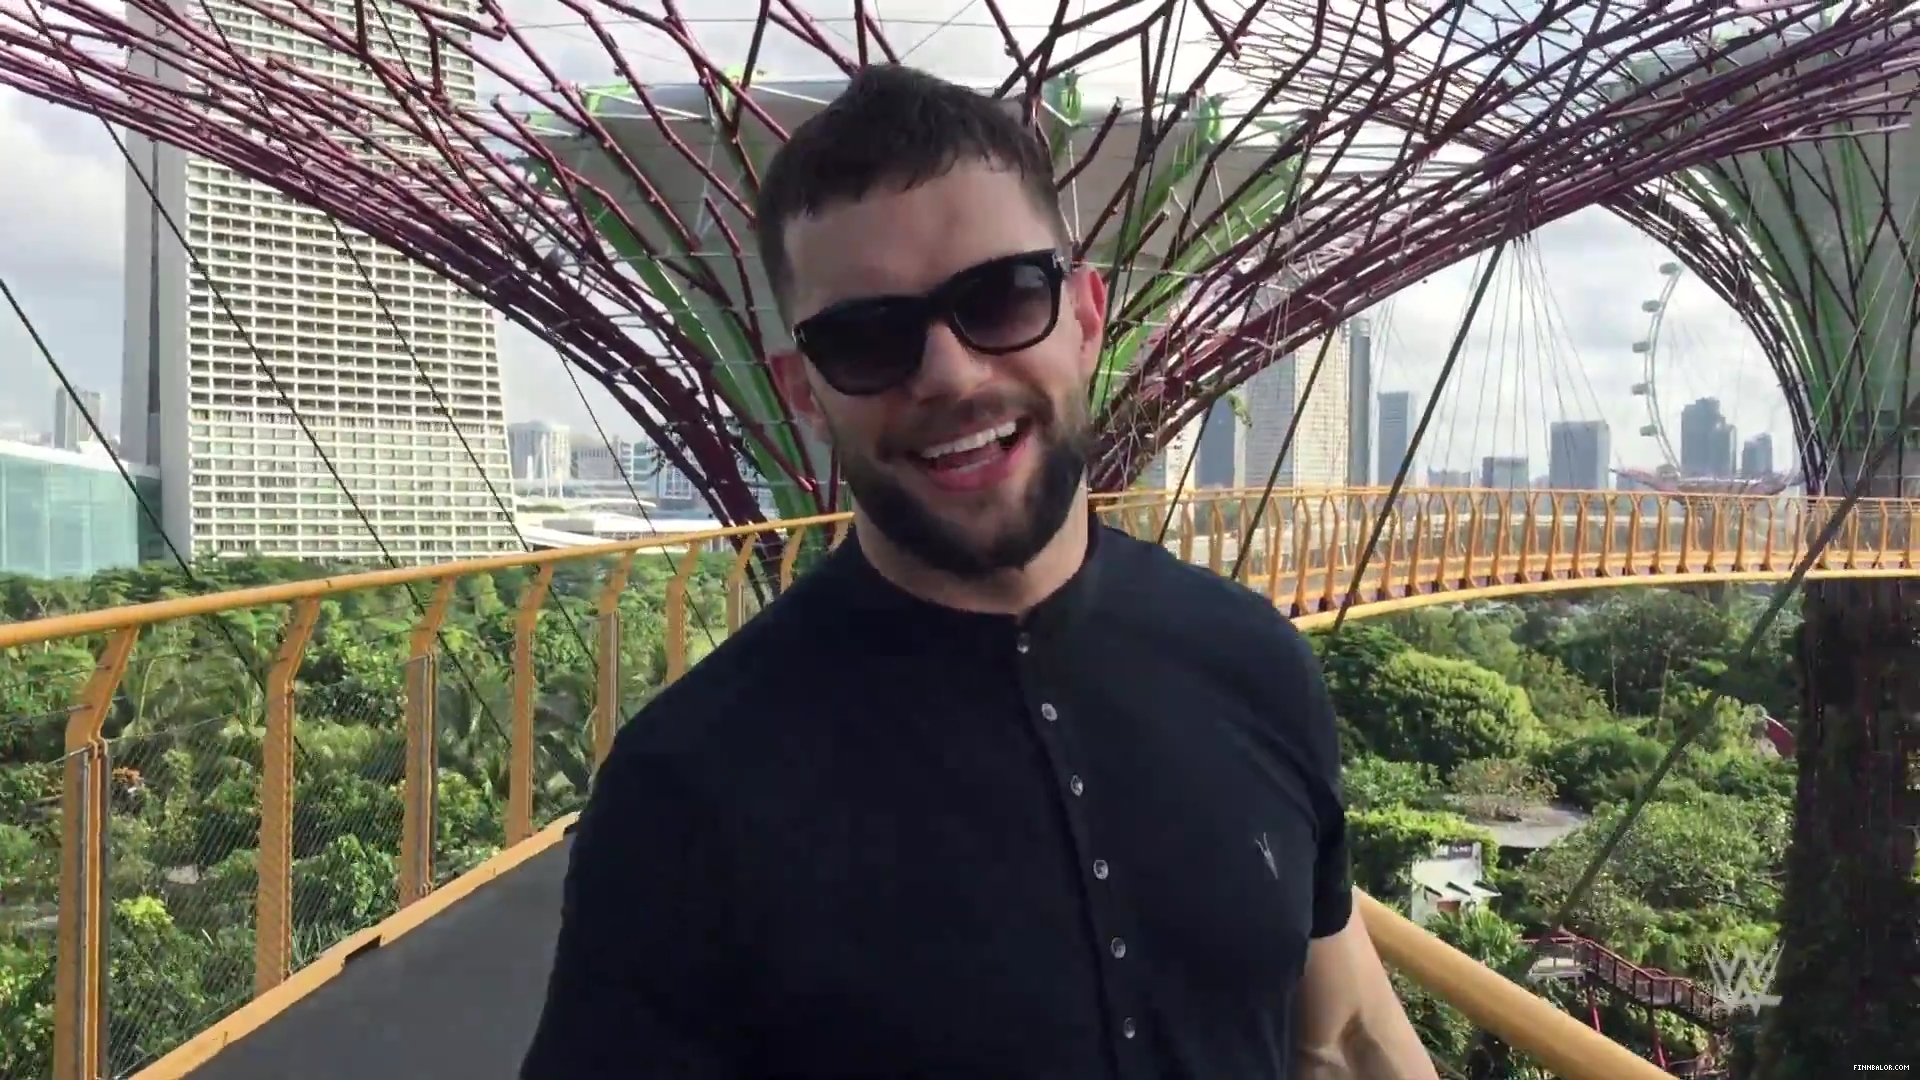 Finn_Balor_feels_like_he_is_in__Star_Wars__while_touring_Singapore_s_Supertree__mp40016.jpg